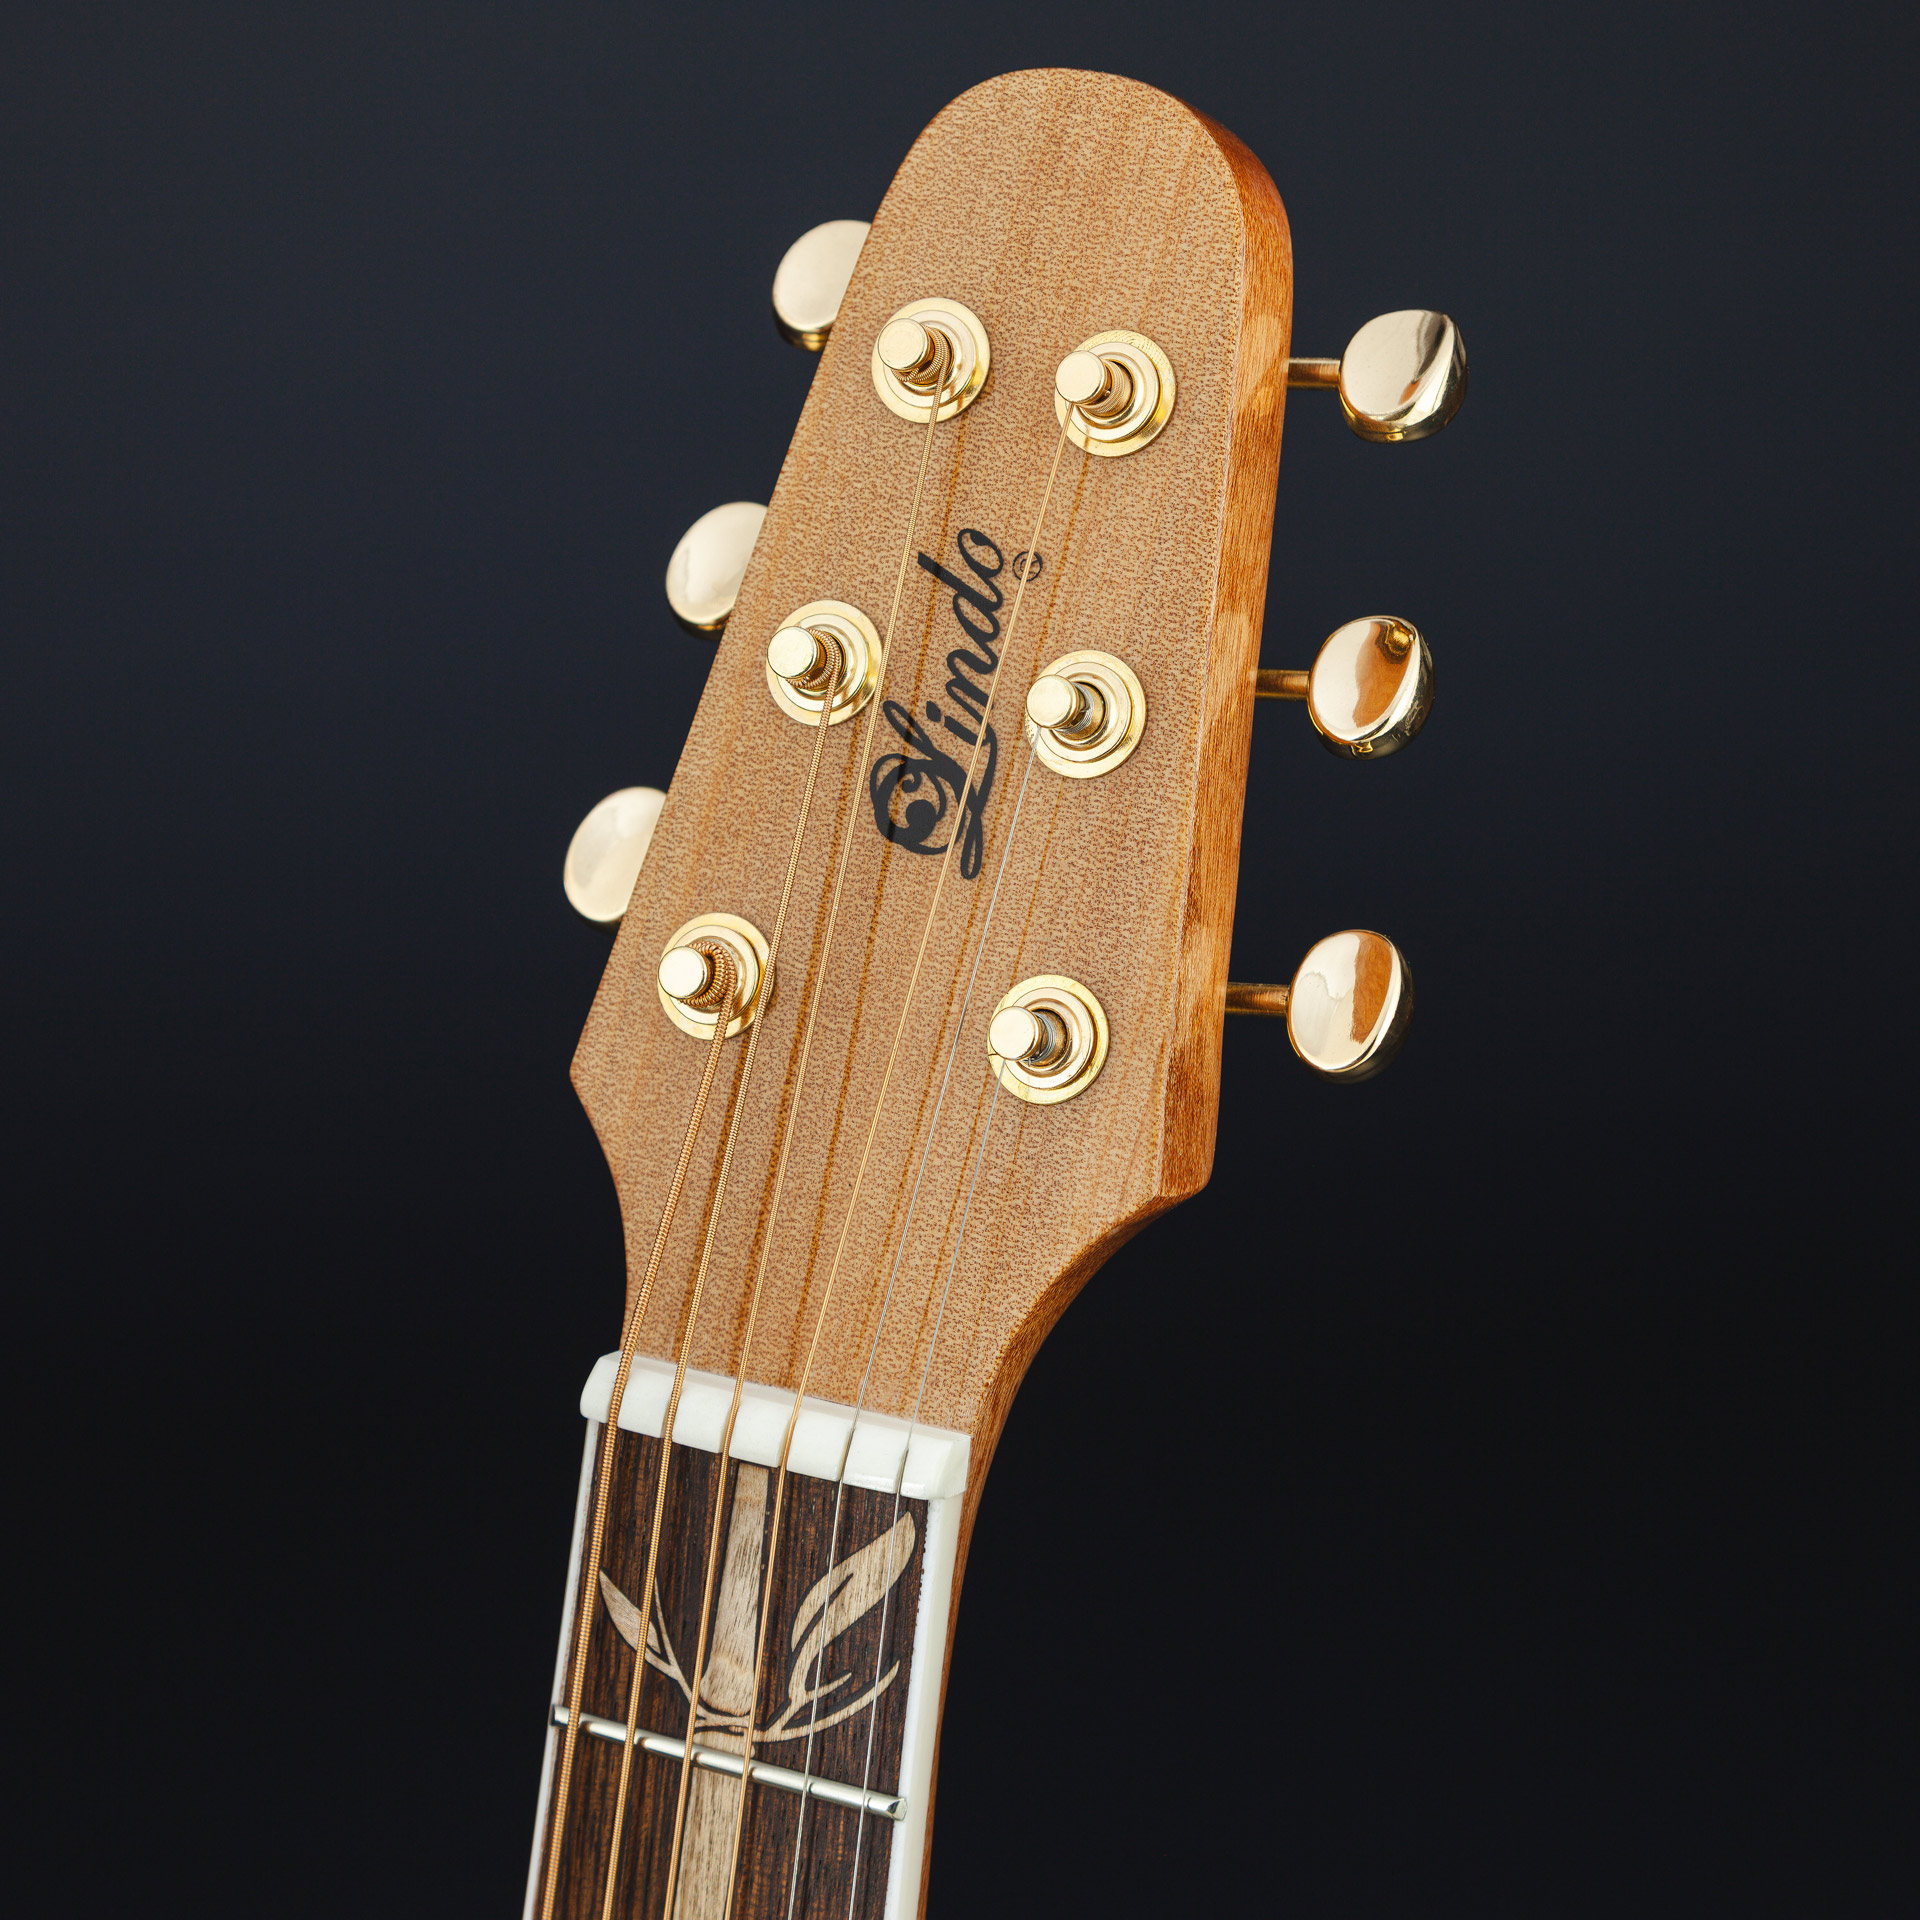 Lindo-Bamboo-Voyager-V2-Electro-Acoustic-Travel-Guitar-Headstock2